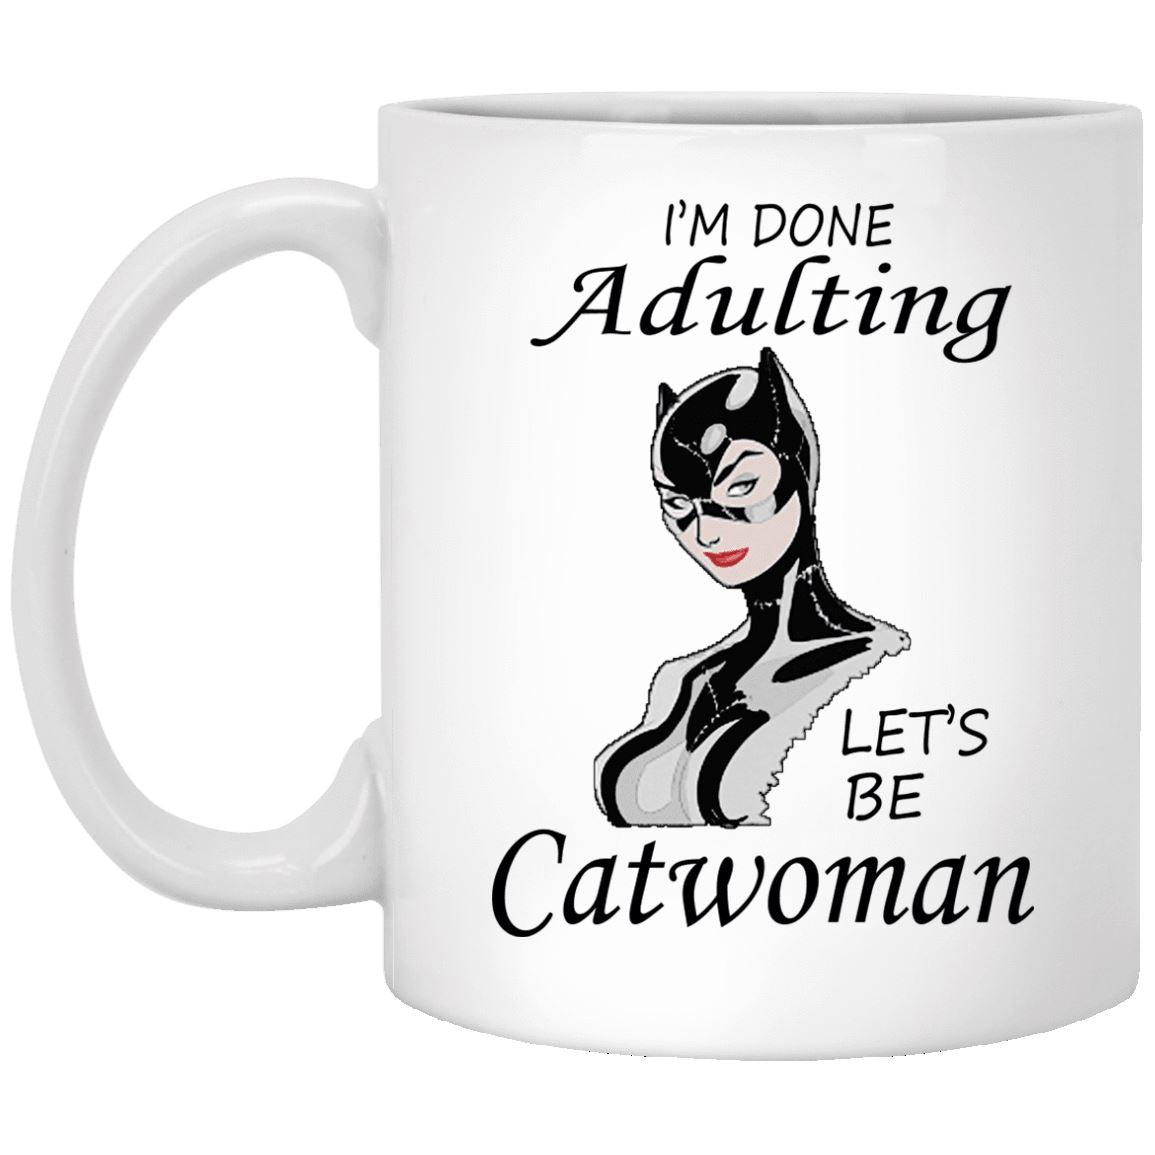 Cat Mug - I'm Done Adulting Let's Be Catwoman - CatsForLife